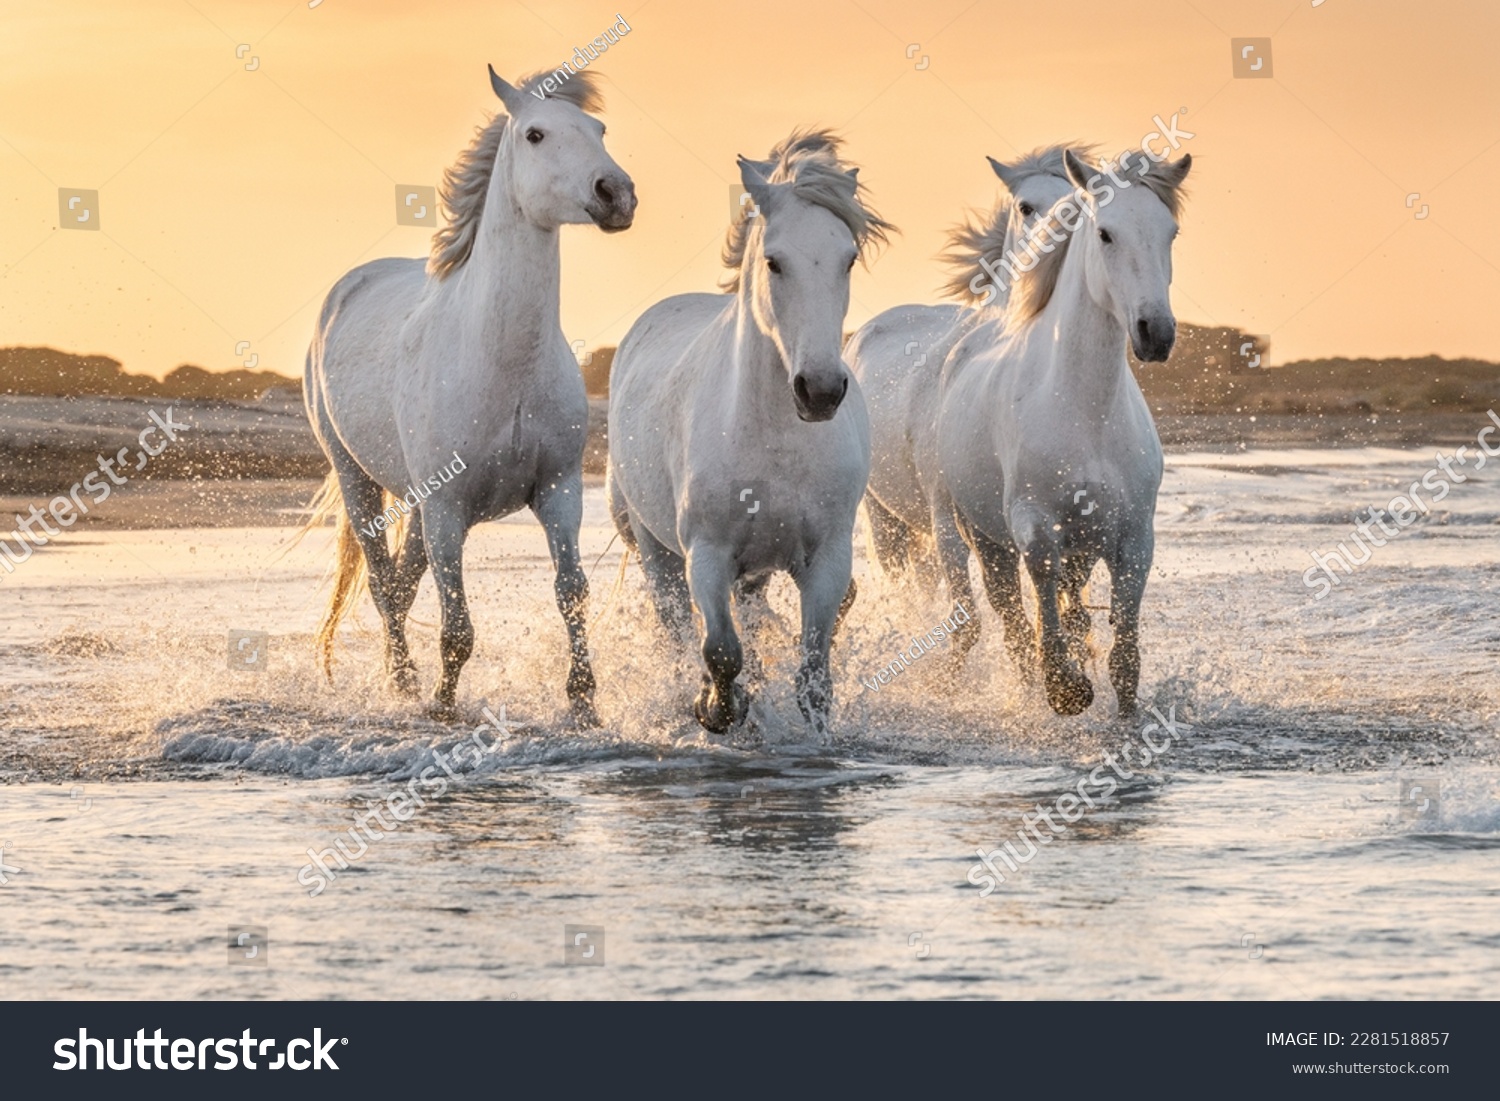 Herd of white horses running through the water. Image taken in Camargue, France. #2281518857